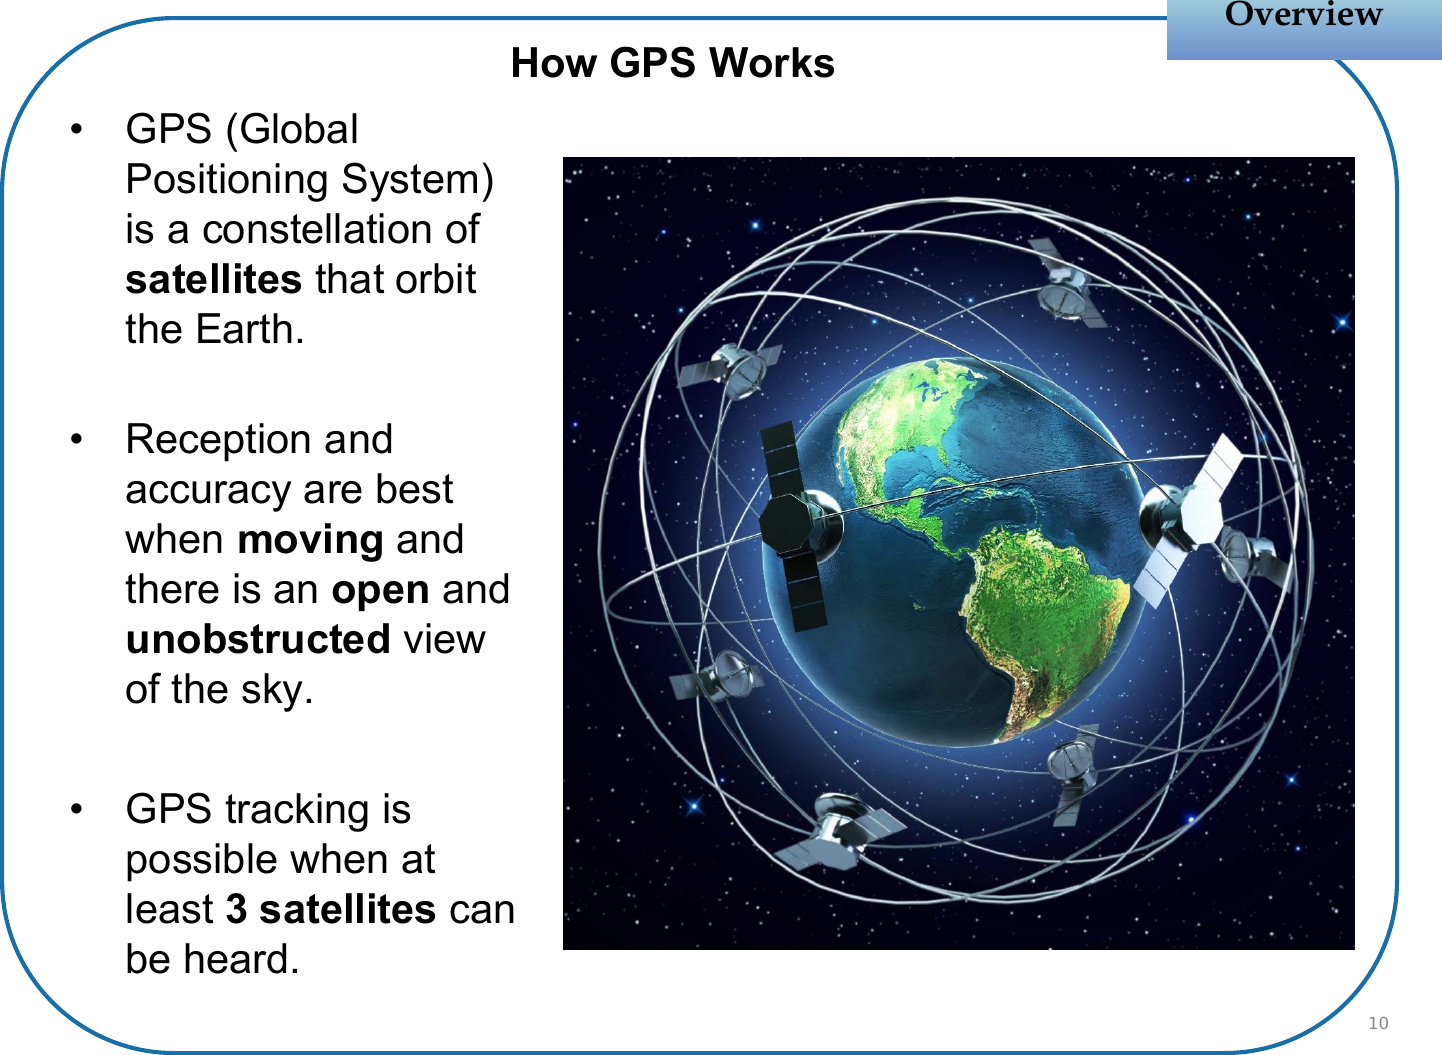 OverviewOverviewHow GPS Works• GPS (Global Positioning System) is a constellation of satellites that orbit the Earth.• Reception and accuracy are best when moving and there is an open and unobstructed view of the sky.• GPS tracking is possible when at least 3 satellites can be heard.10